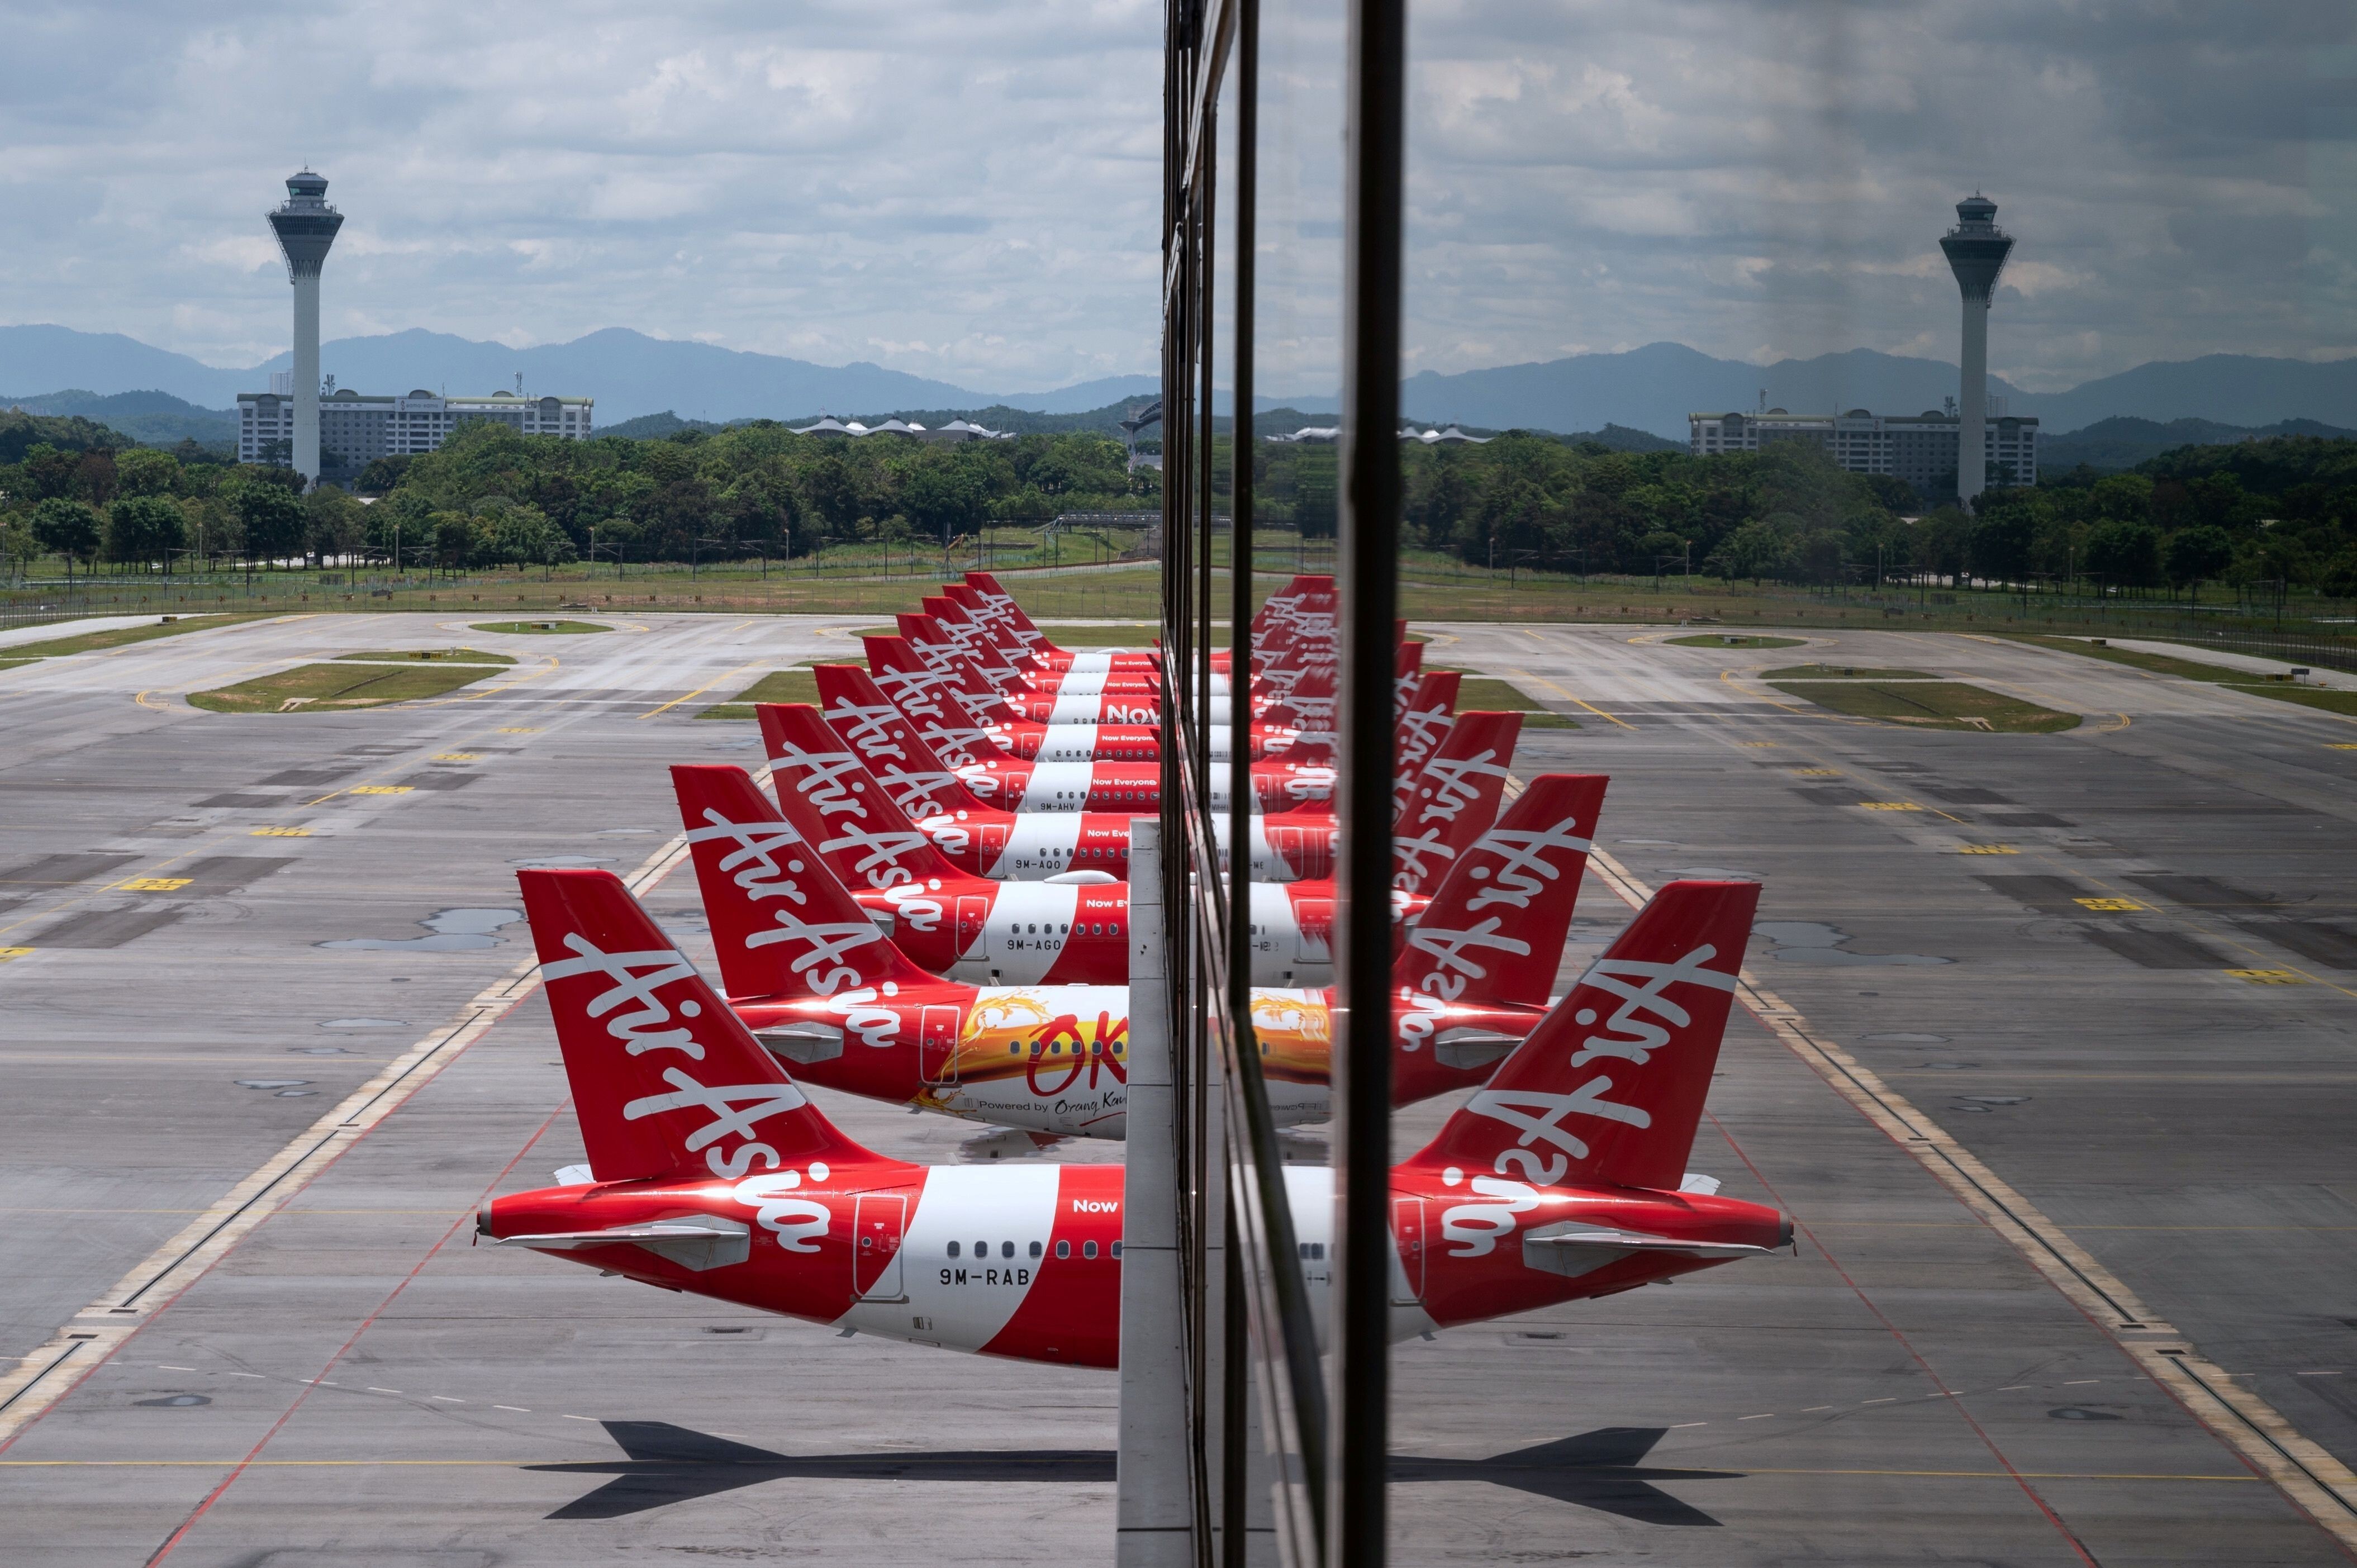 Grounded aeroplanes in Malaysia. Covid-19 has impacted travel around the world, but as Kishore Mahbubabi writes, the genie of globalisation cannot be put back in the bottle. Photo: AFP